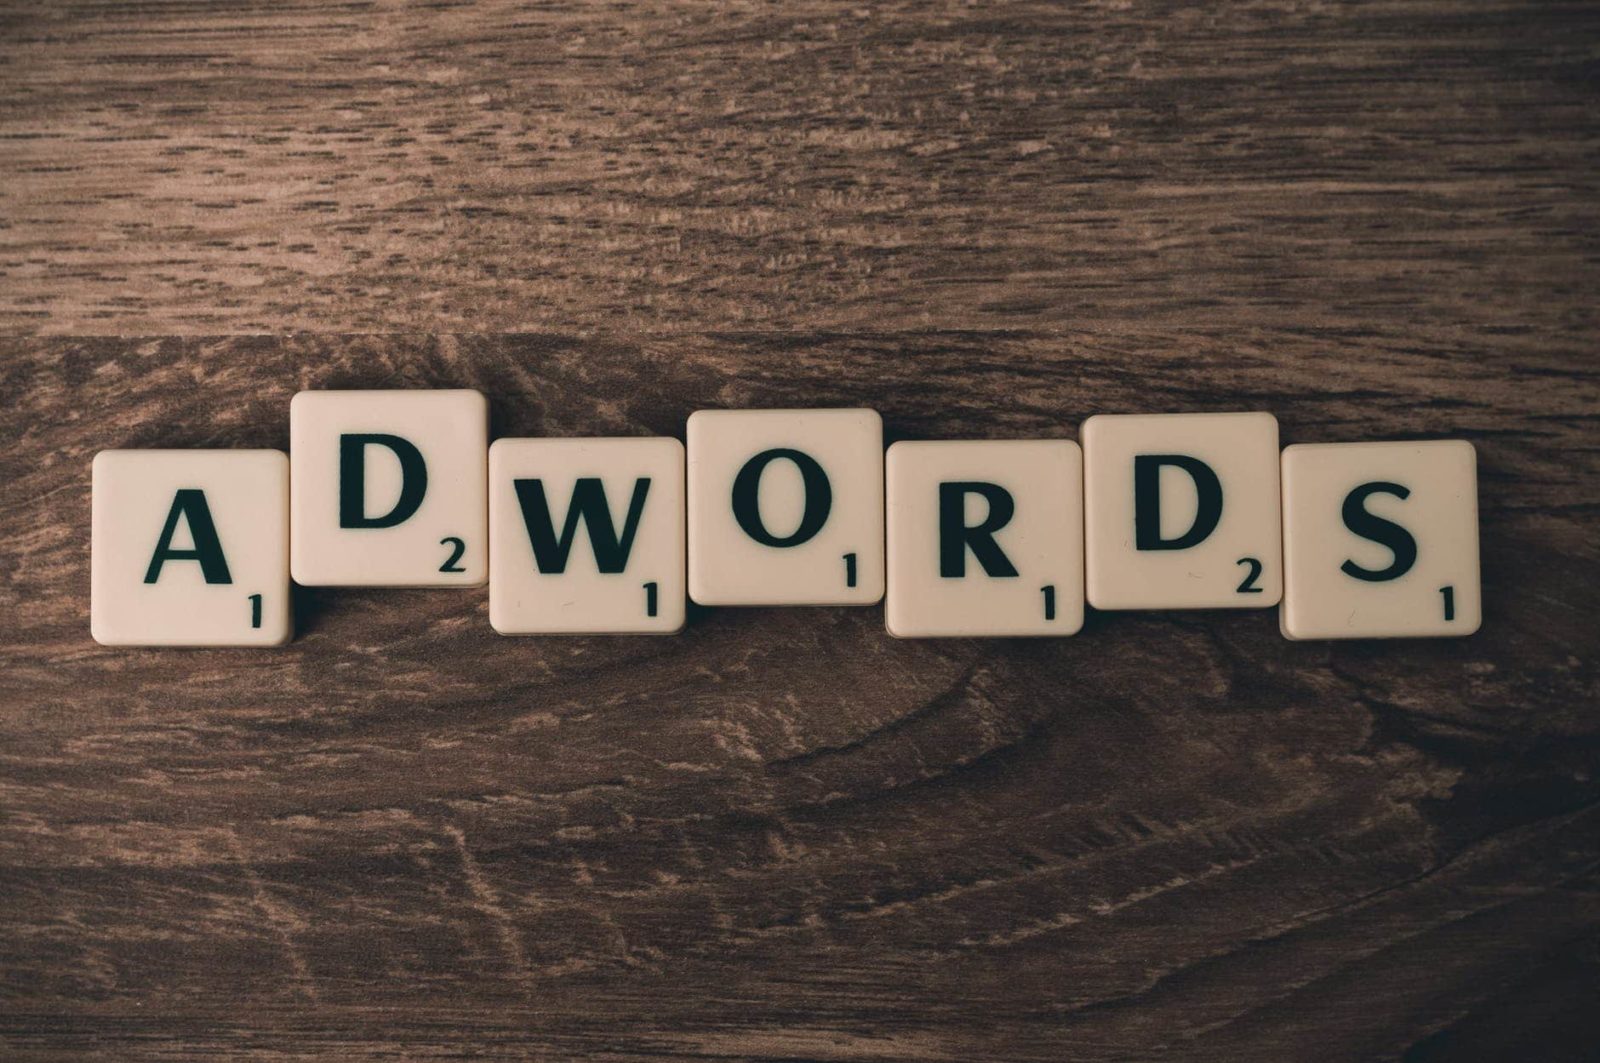 paid ads service Adwords a scrabble style